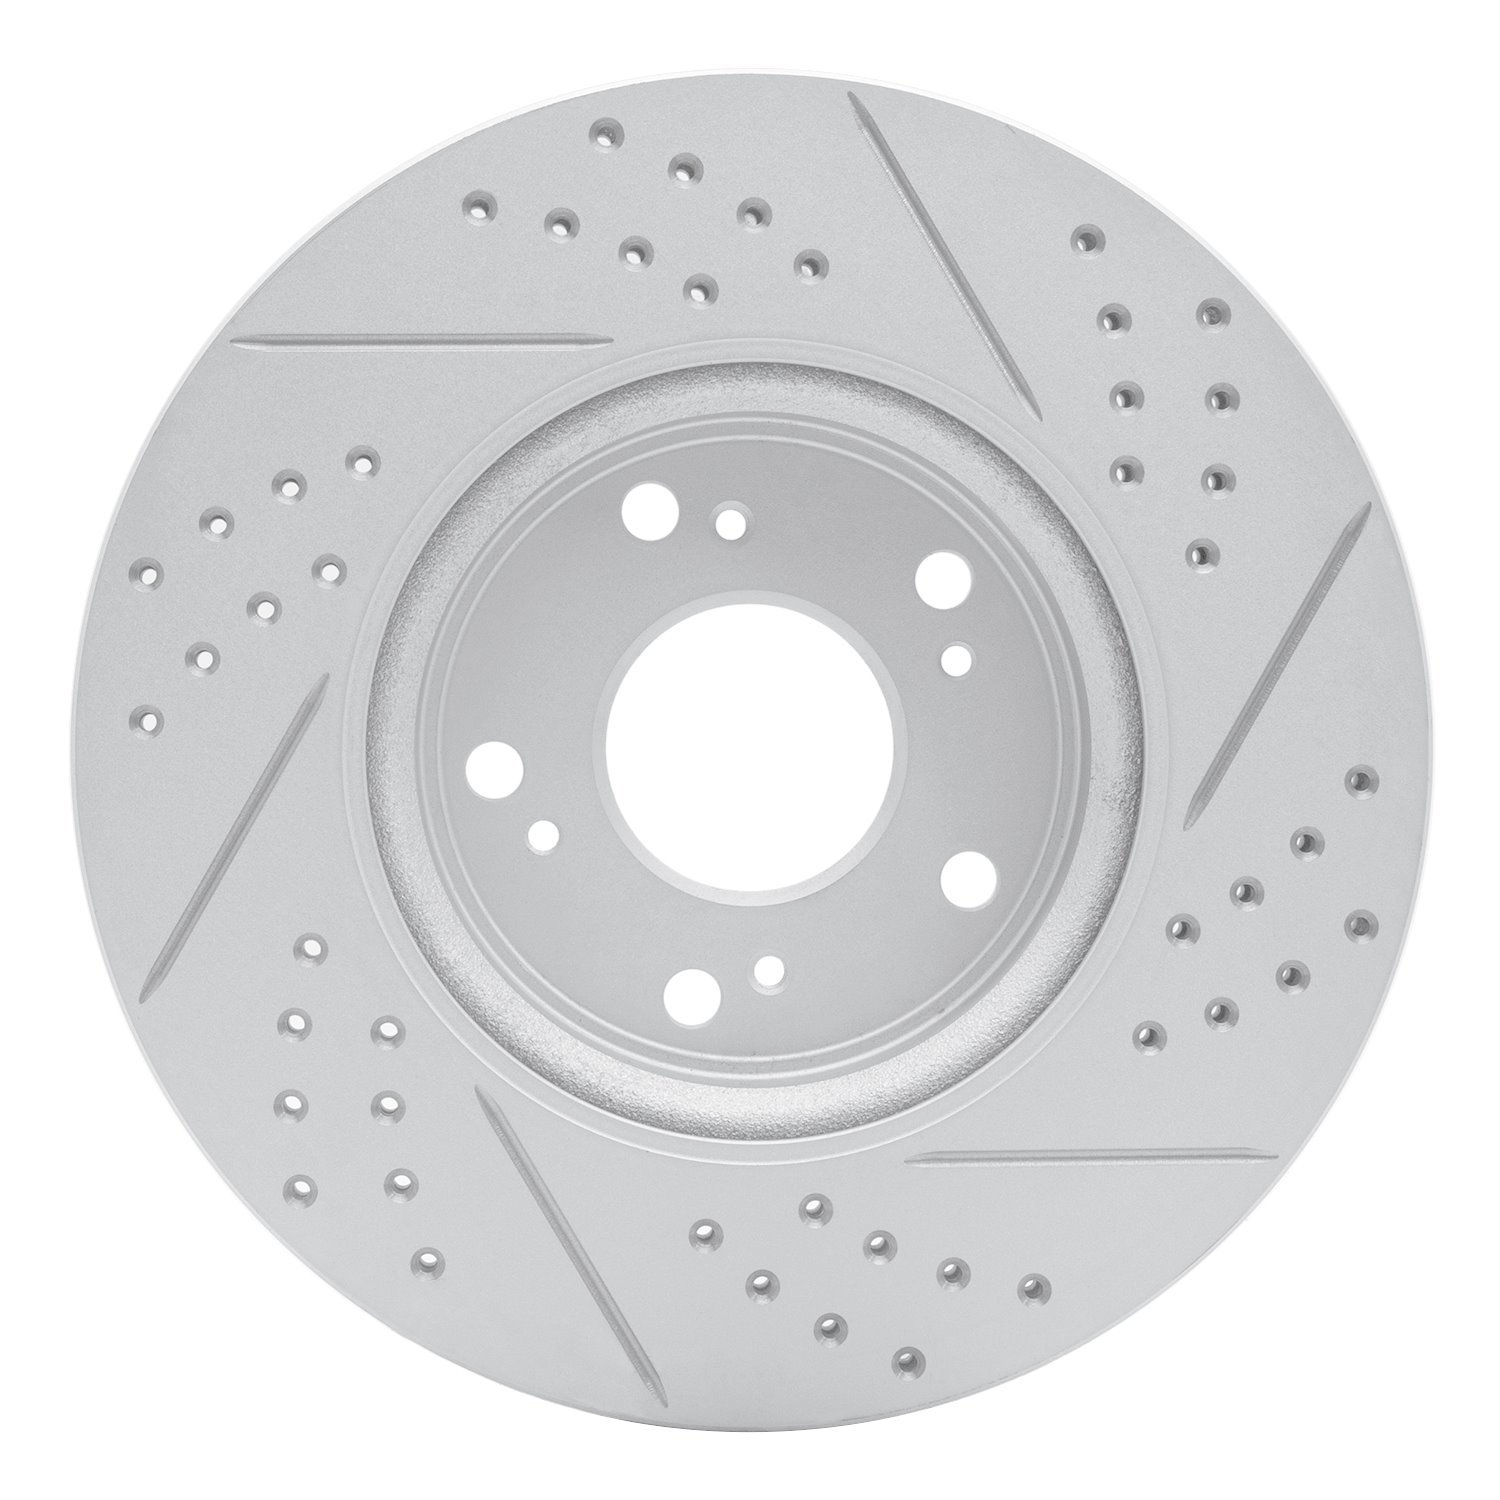 830-59037L Geoperformance Drilled/Slotted Brake Rotor, Fits Select Acura/Honda, Position: Front Left